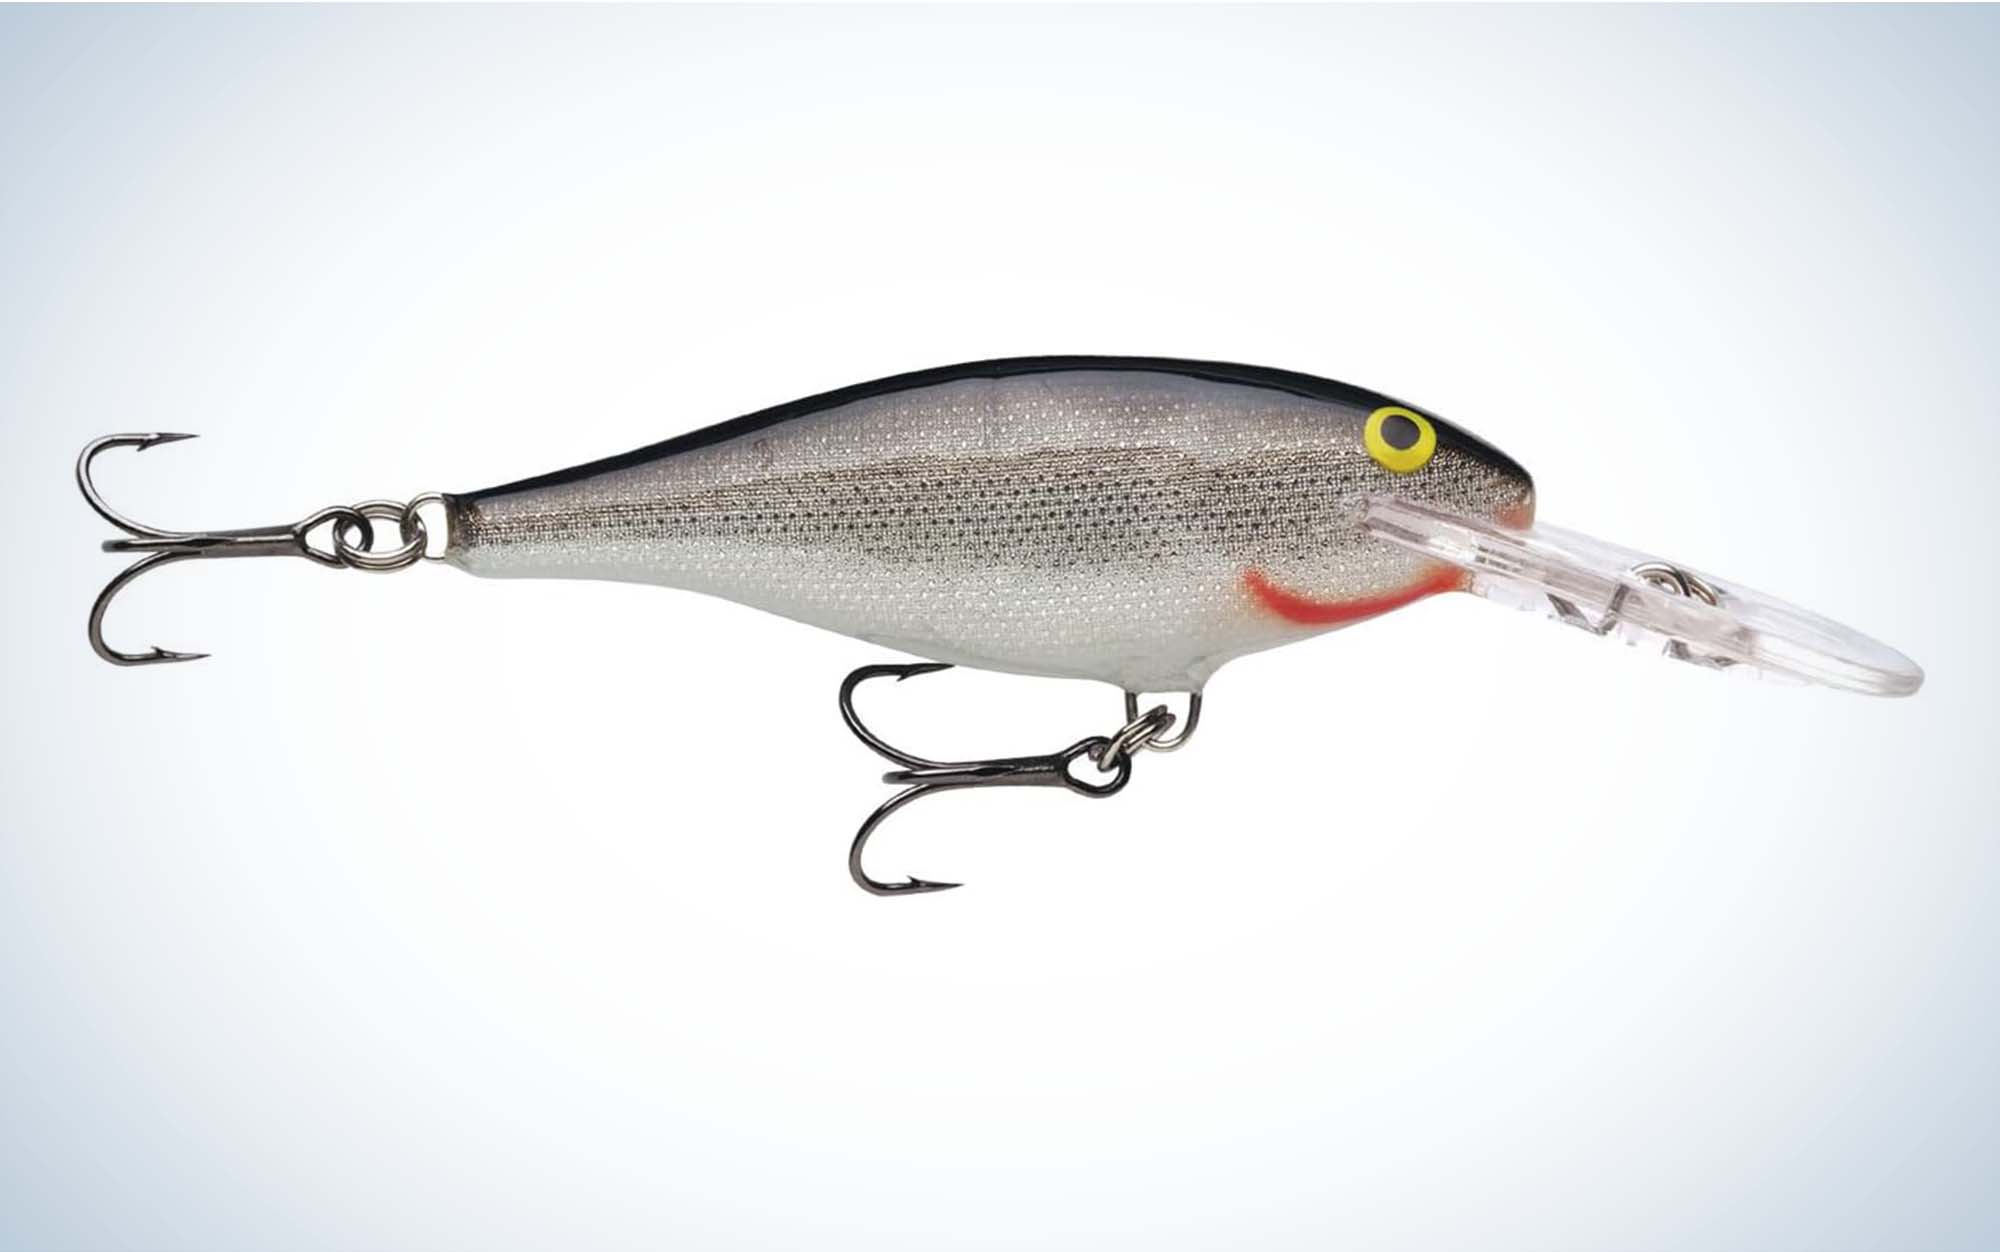 The Shad Rap is the best winter crankbait for bass